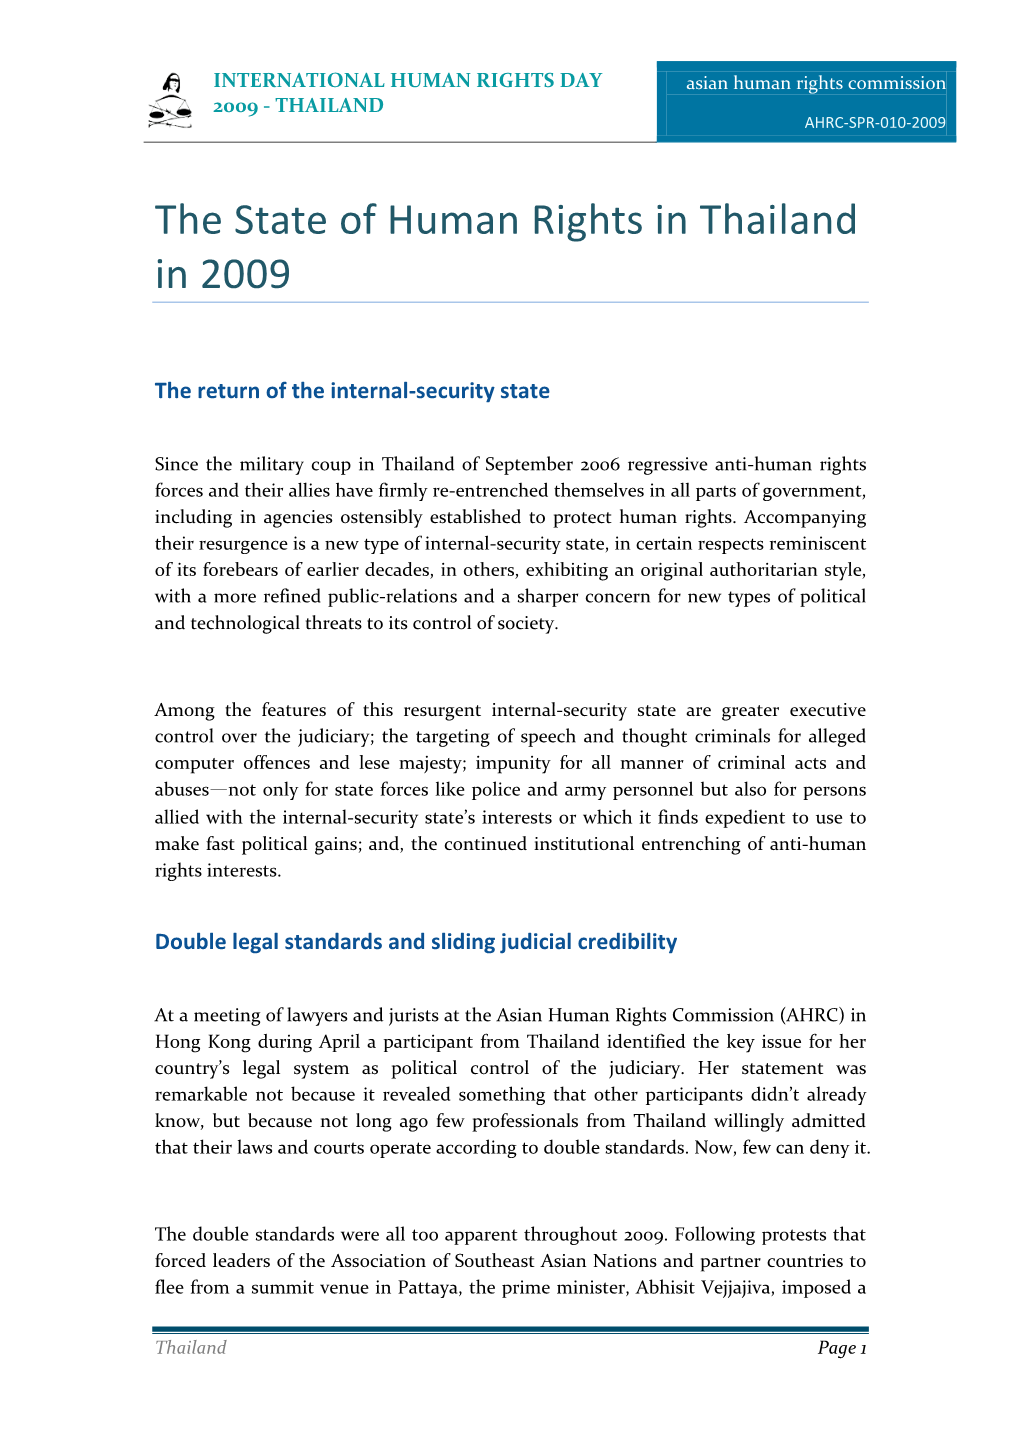 Human Rights Report 2009